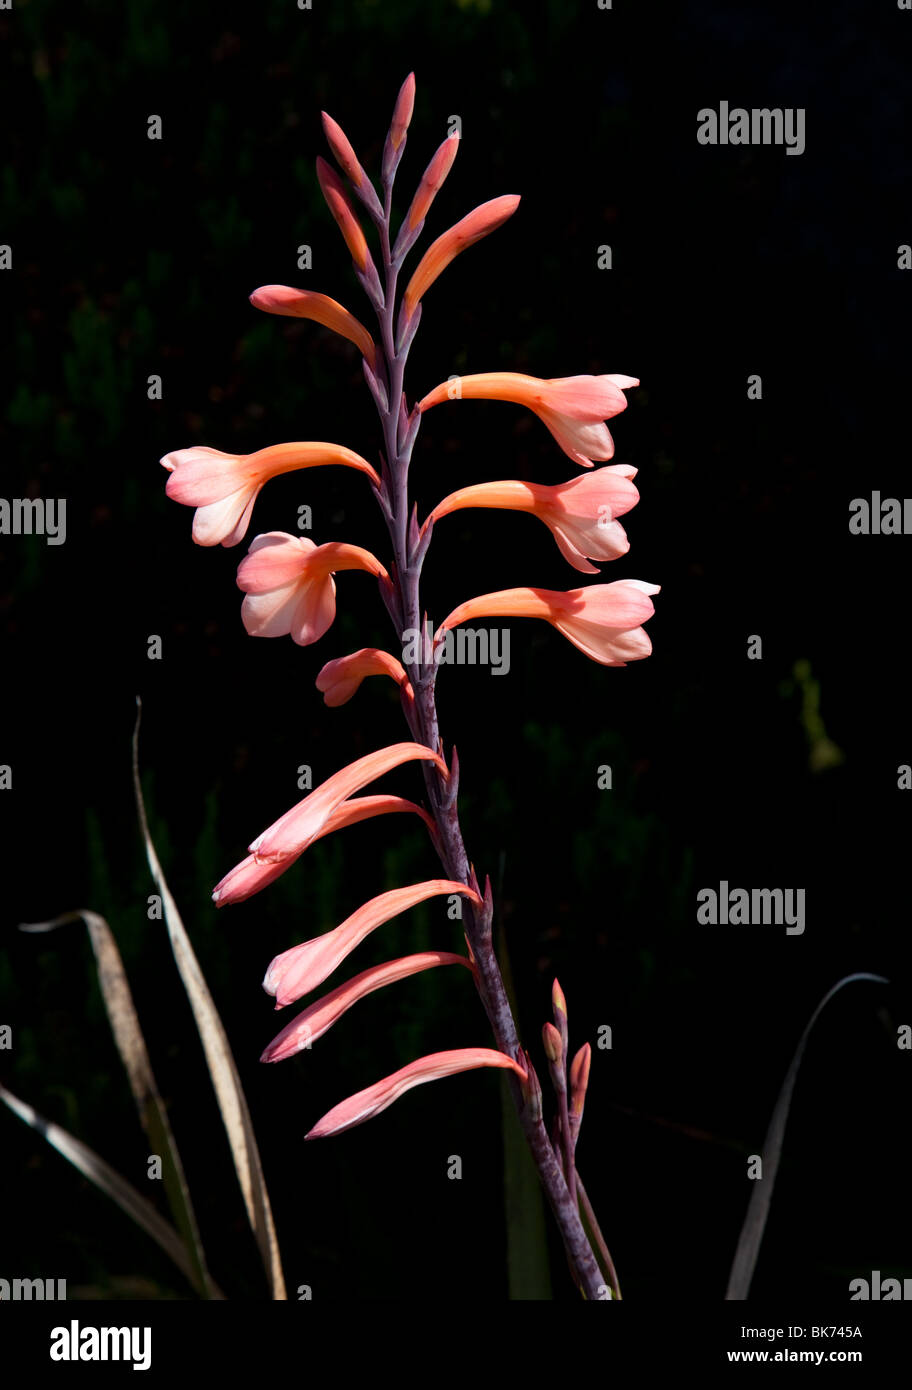 Close-up of a Watsonia flower in bloom Stock Photo